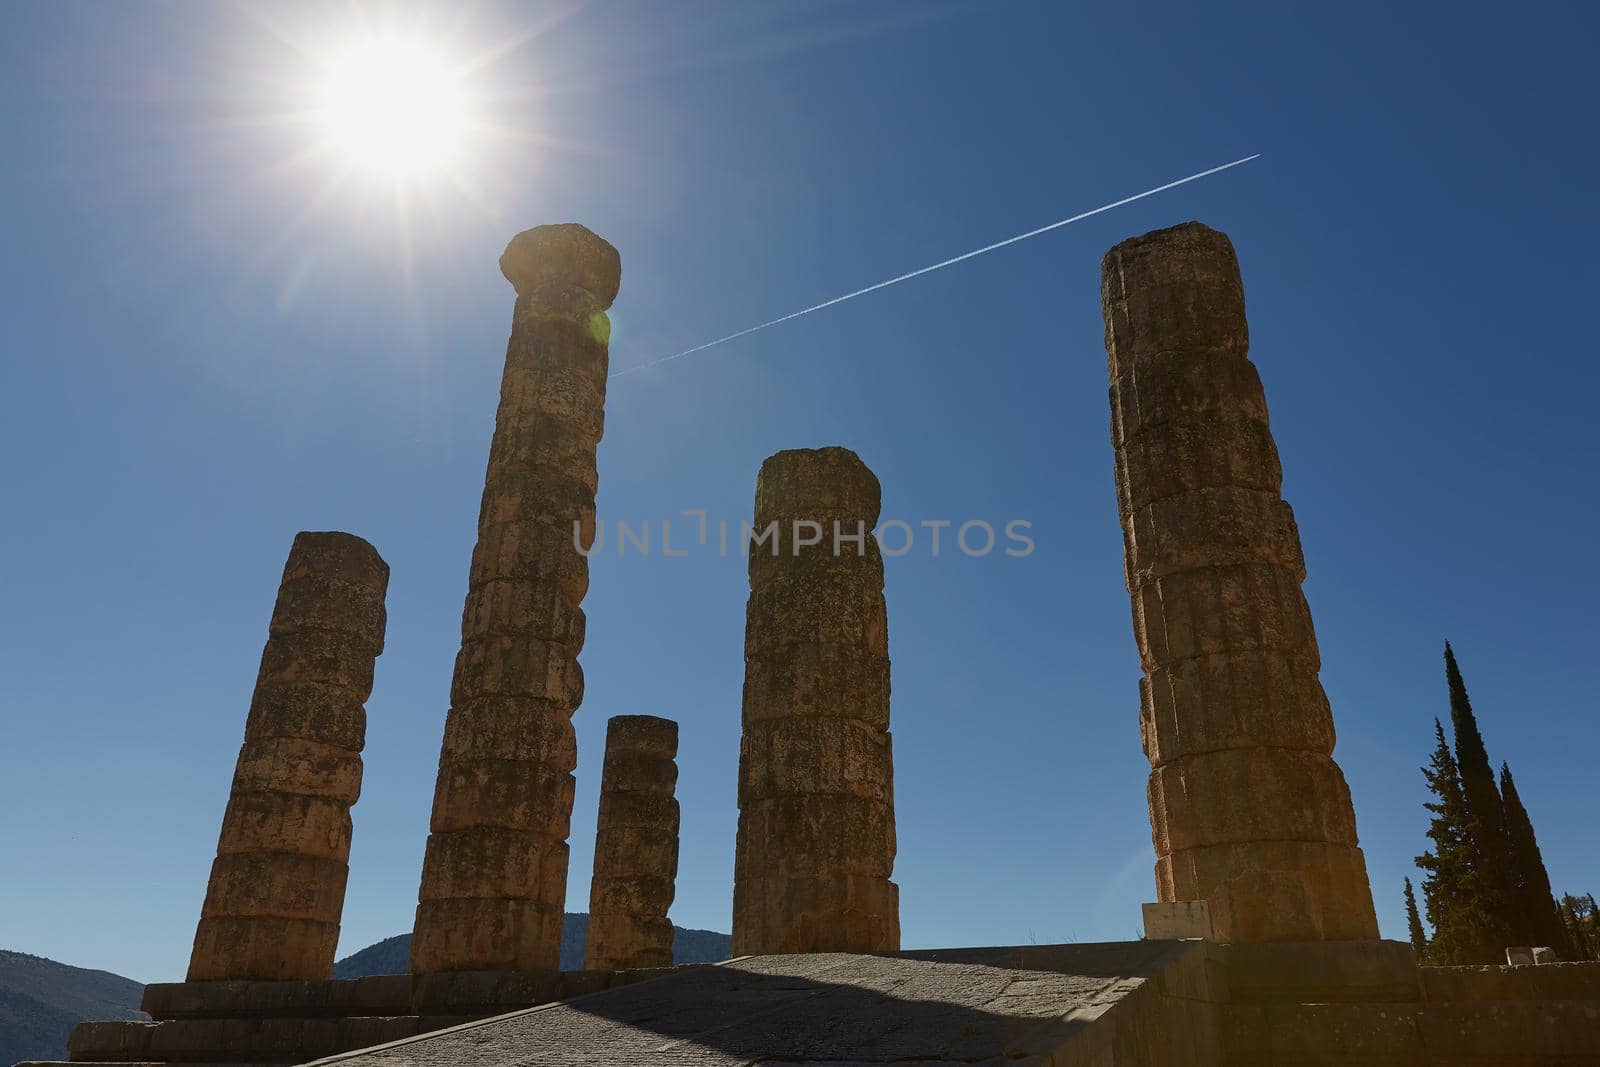 Low Angle View of The Temple of Apollo at Delphi, Greece with Sun Star Effect